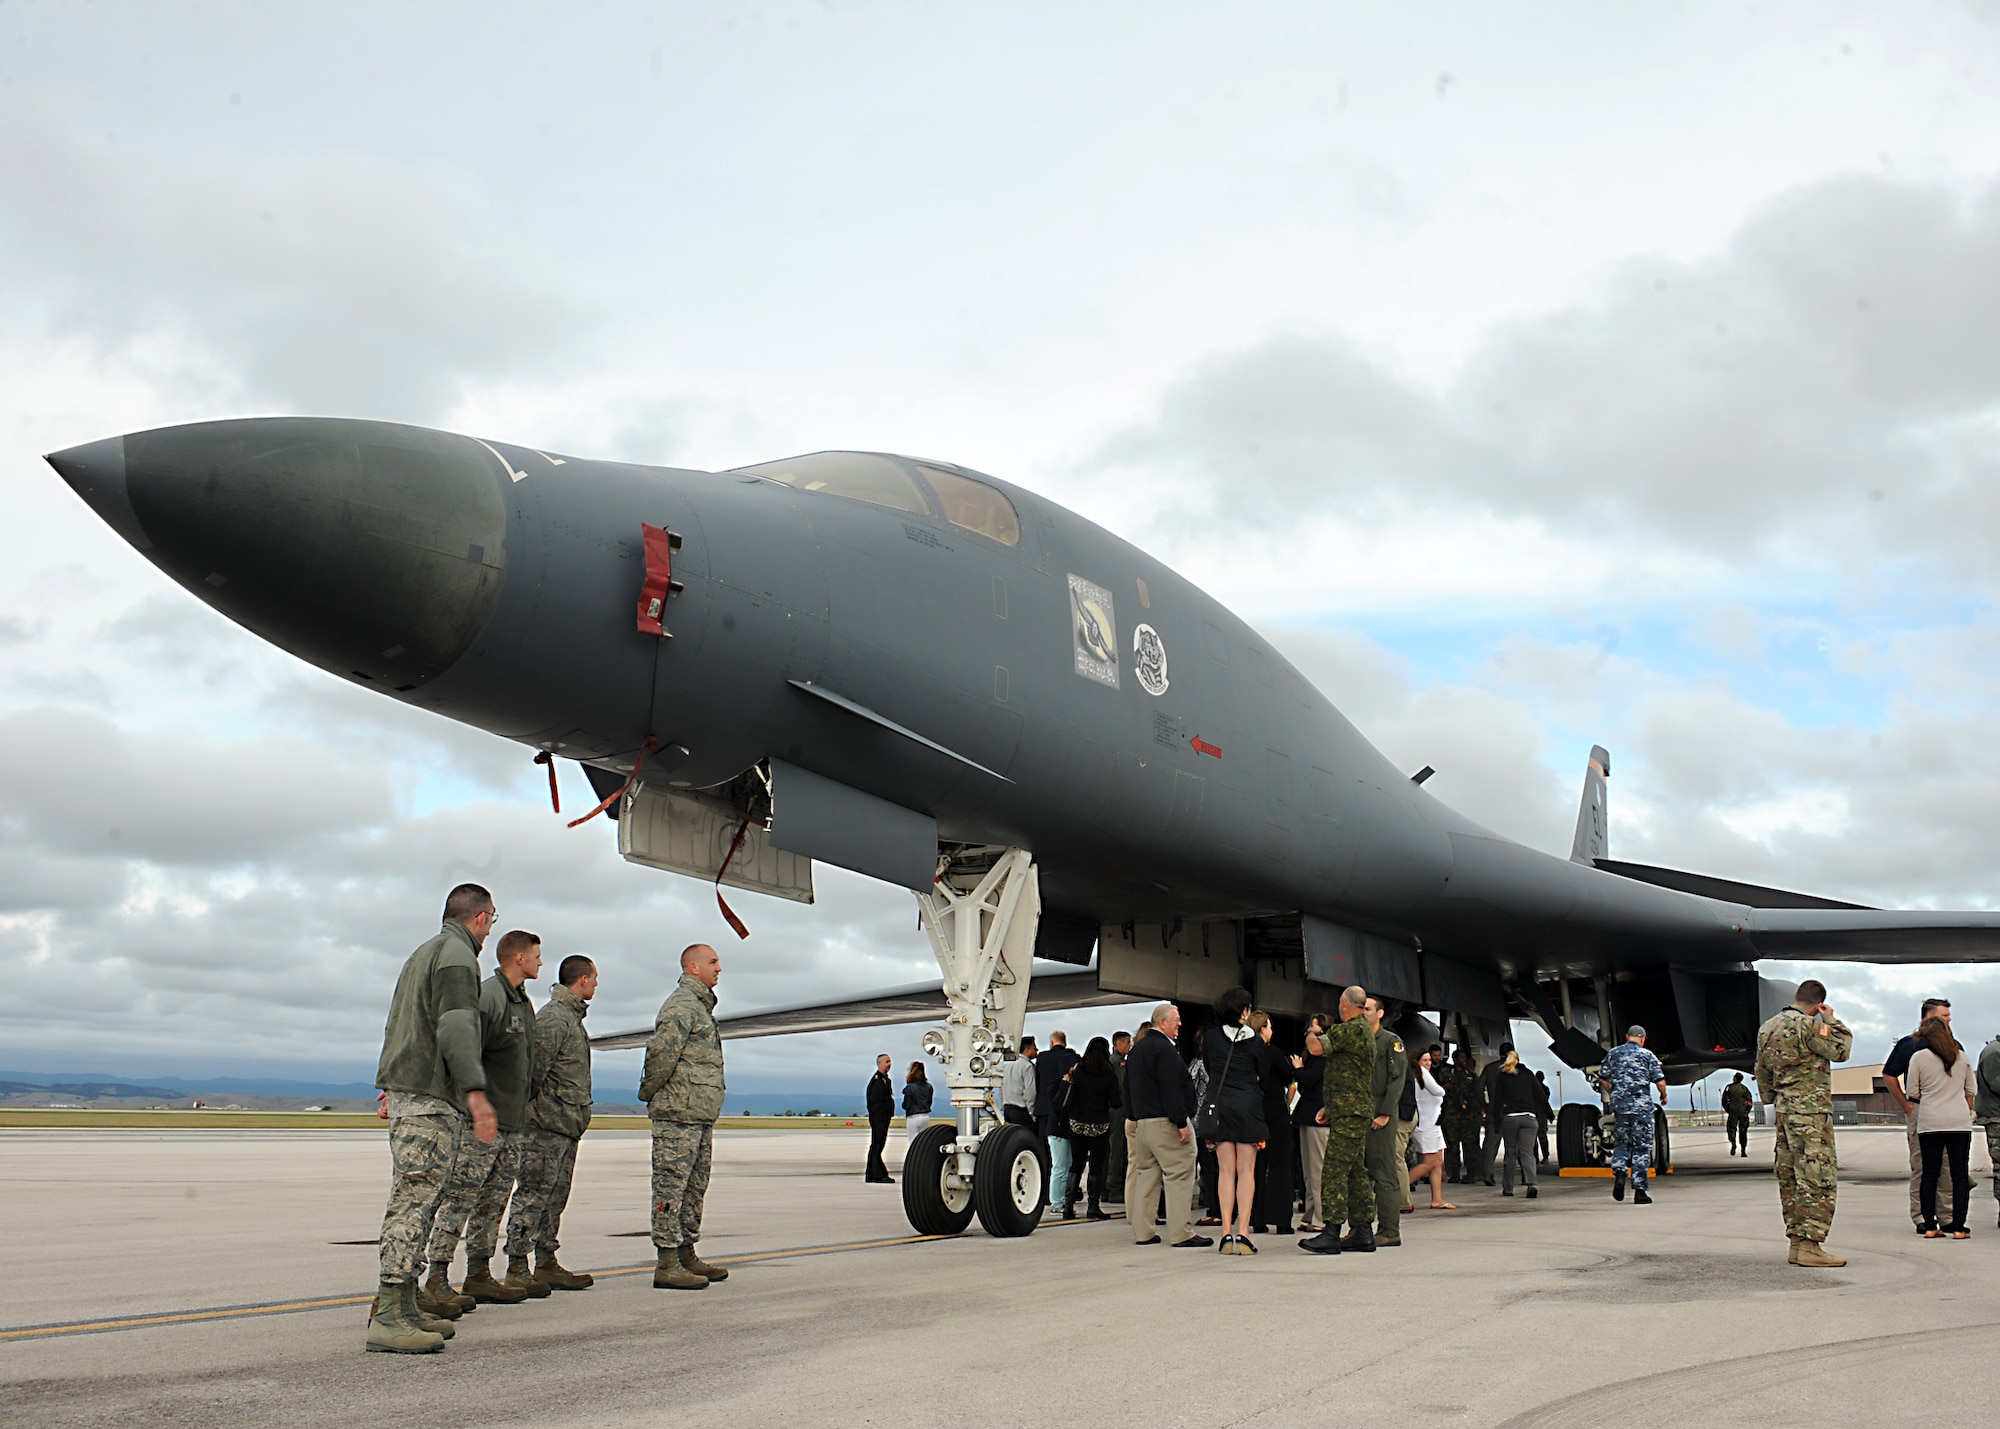 A group of foreign generals and staff members observe a static display of a B-1 bomber at Ellsworth Air Force Base, S.D., Sept. 12, 2016. The event was among five base tours undertaken every six months as a Secretary of Defense-directed engagement for senior military attachés from around the world who are stationed in Washington, D.C. (U.S. Air Force photo by Airman 1st Class Marshall L. Brown)